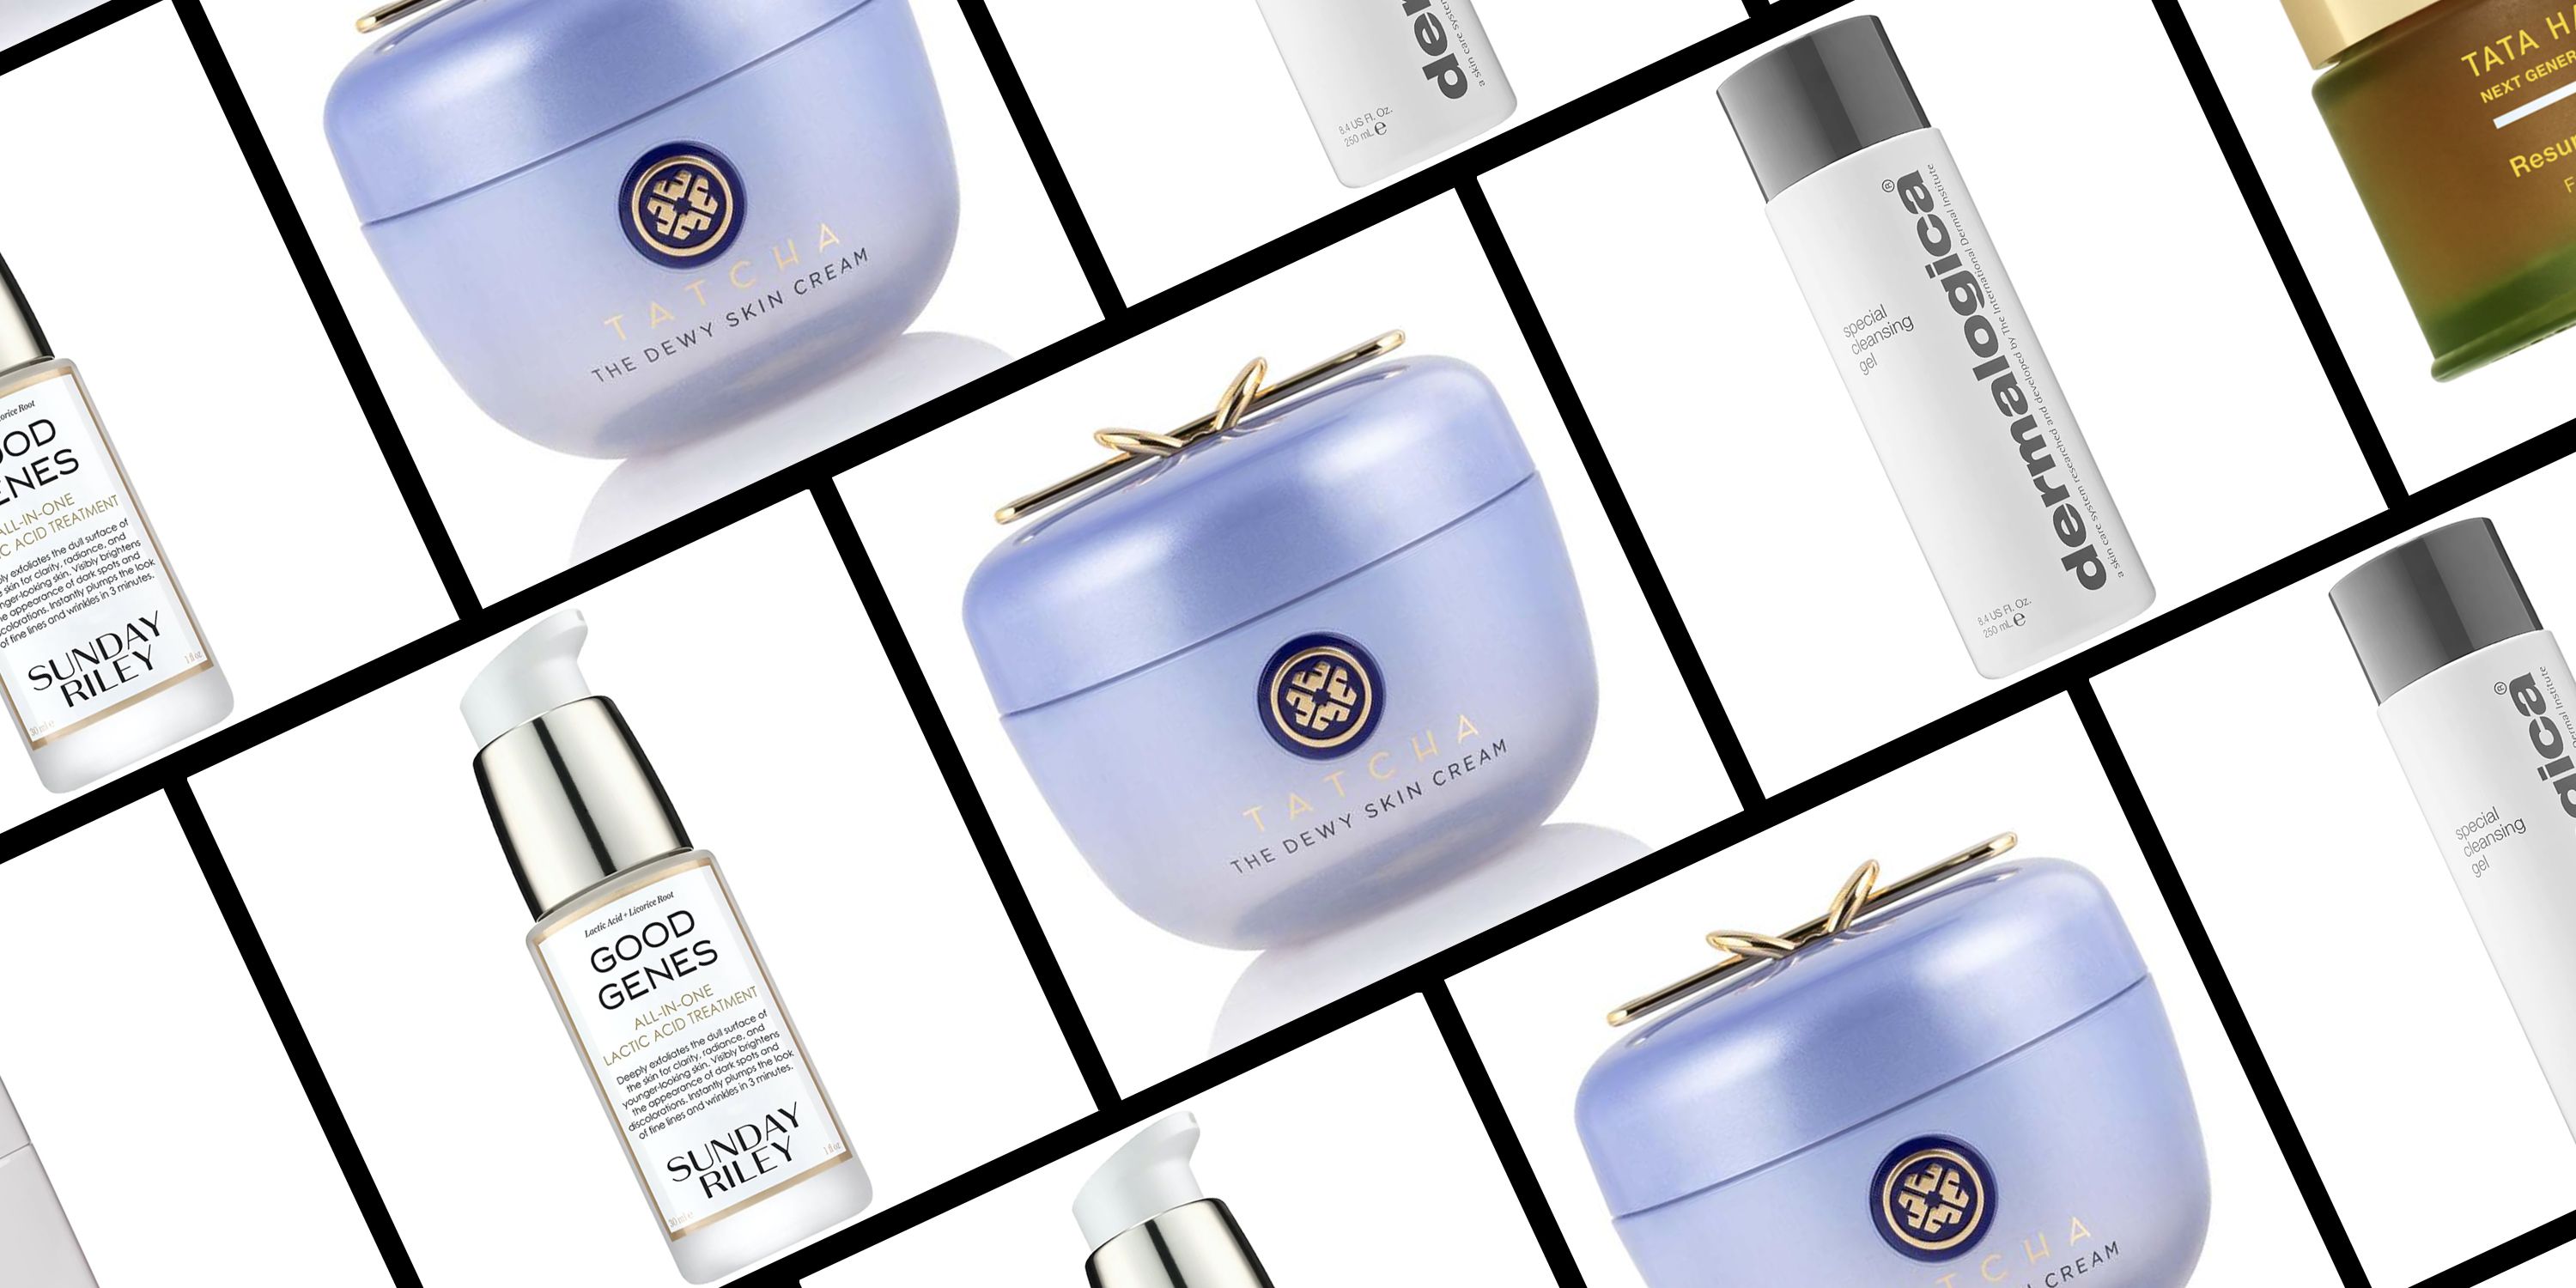 The Best Skincare Brands to Shop in 2022: CeraVe, La Mer, and More